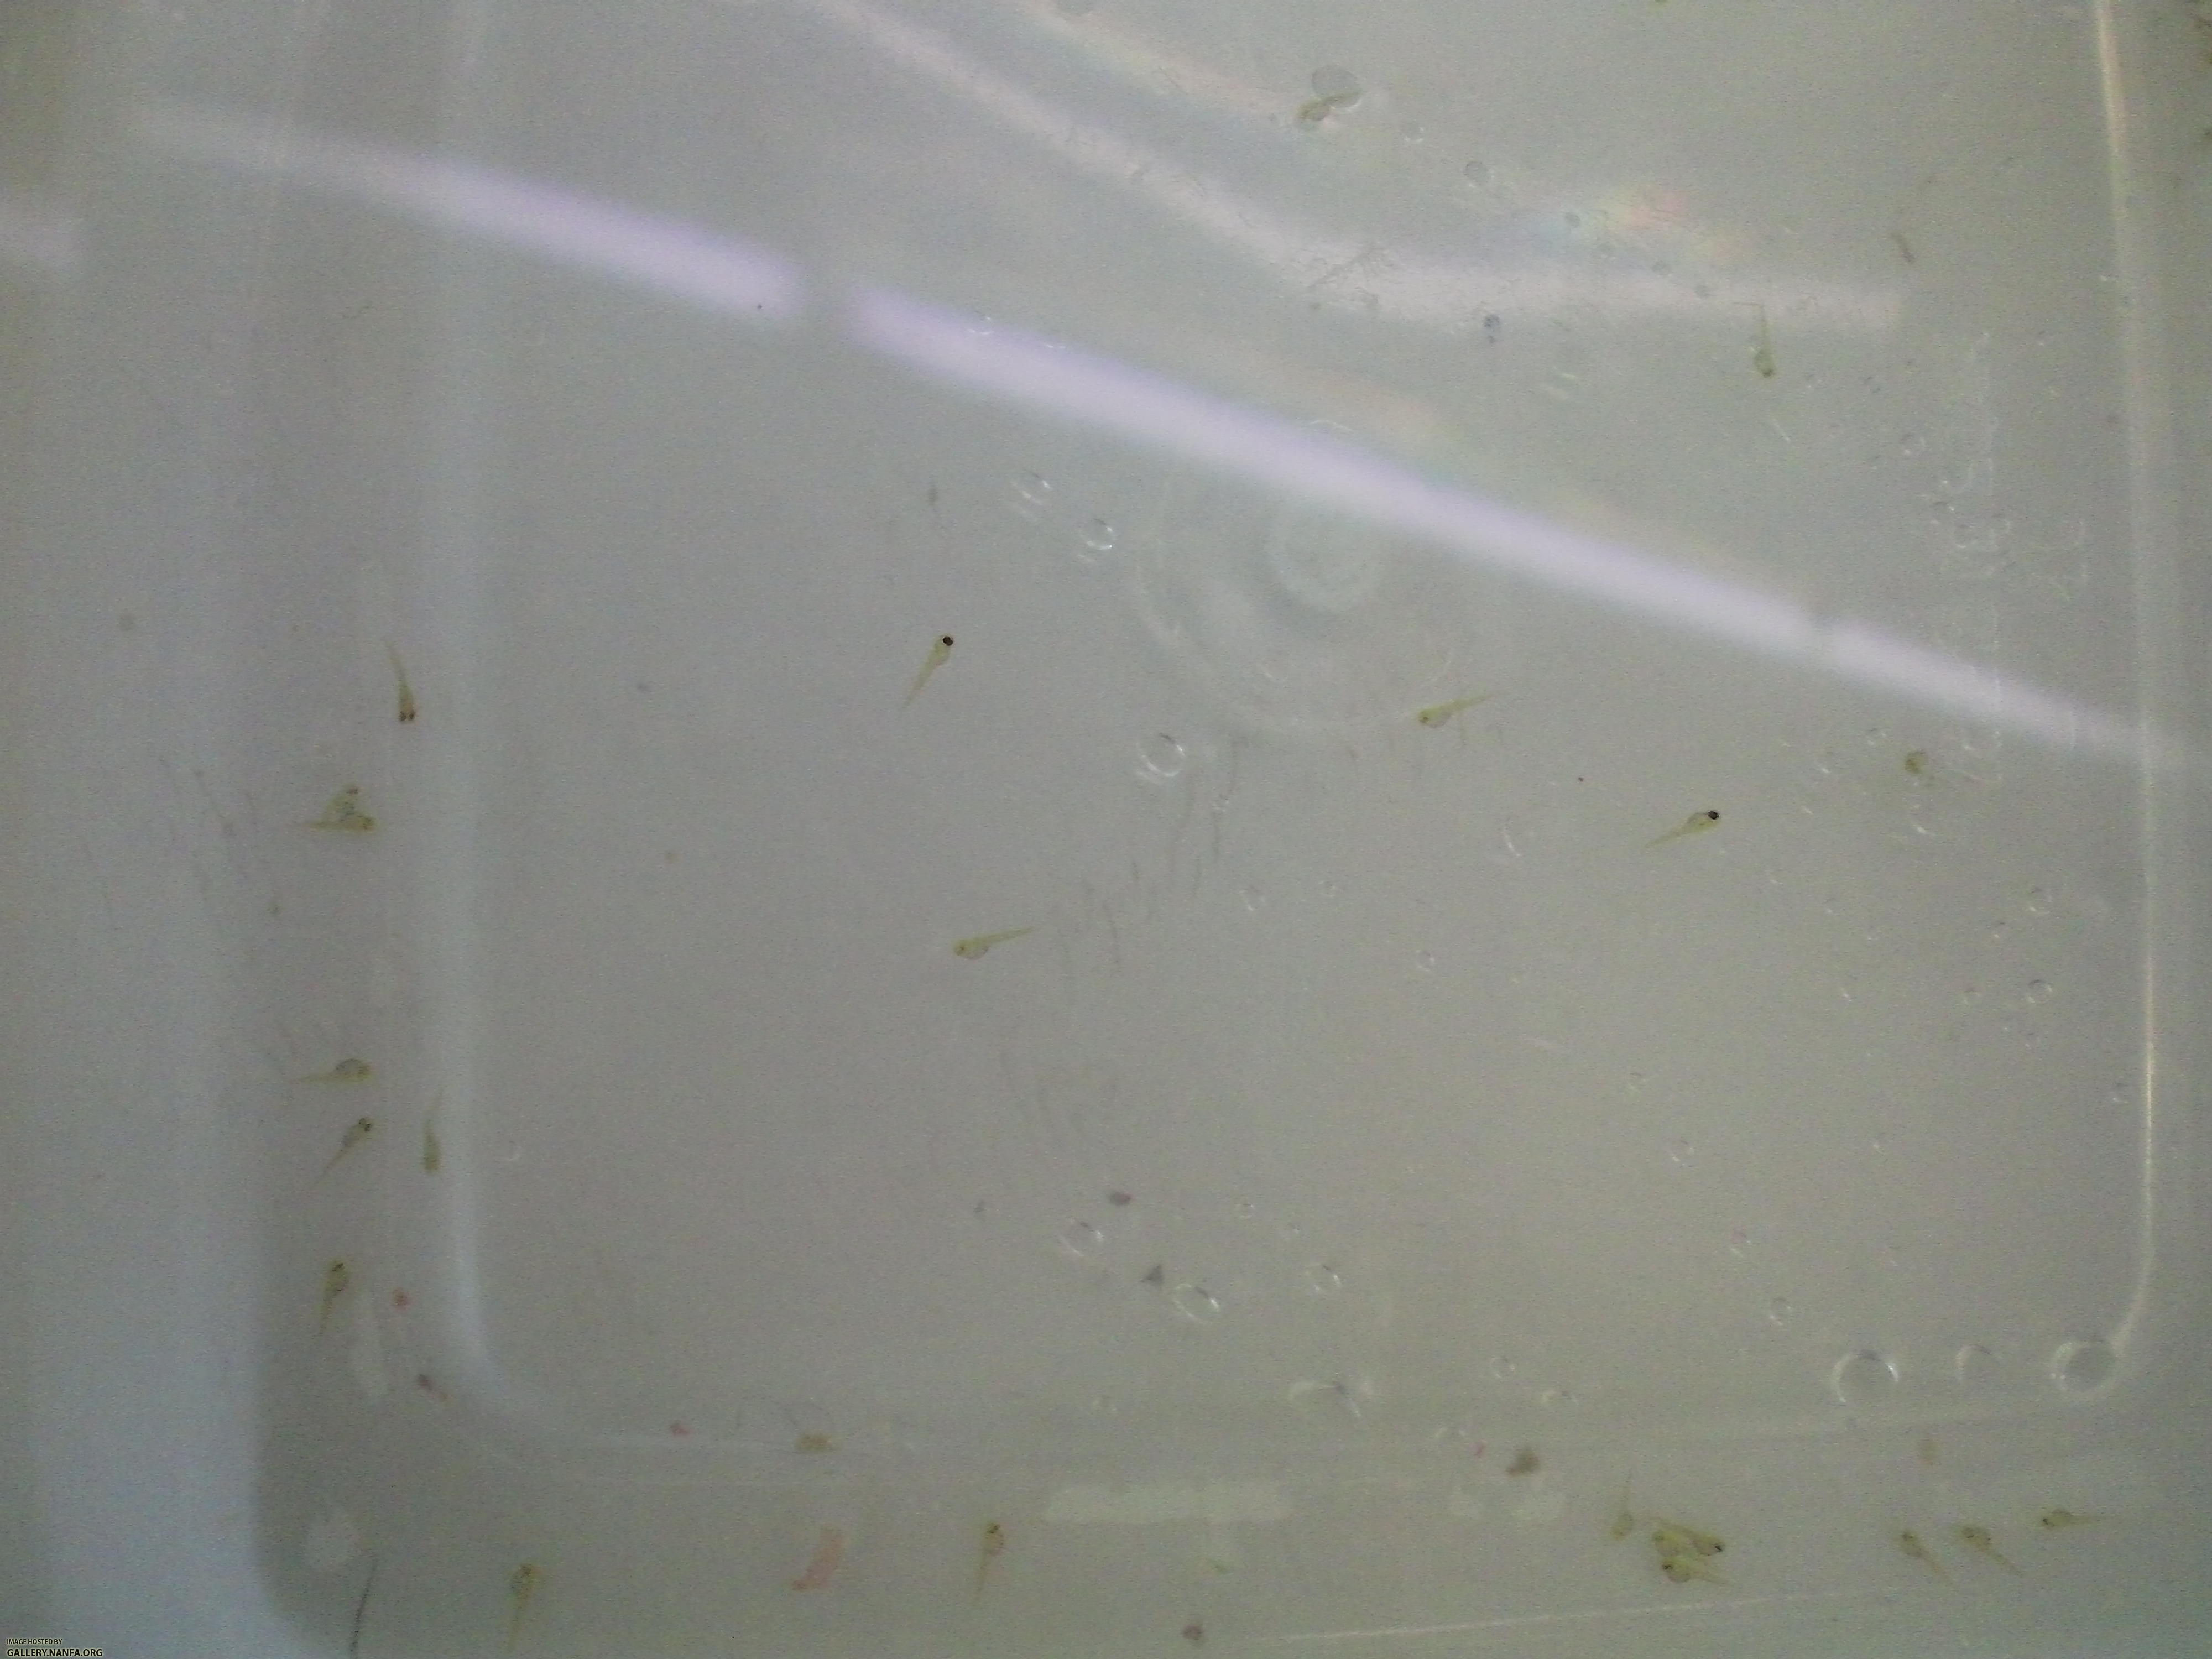 Elassoma gilberti fry four days after eggs were laid